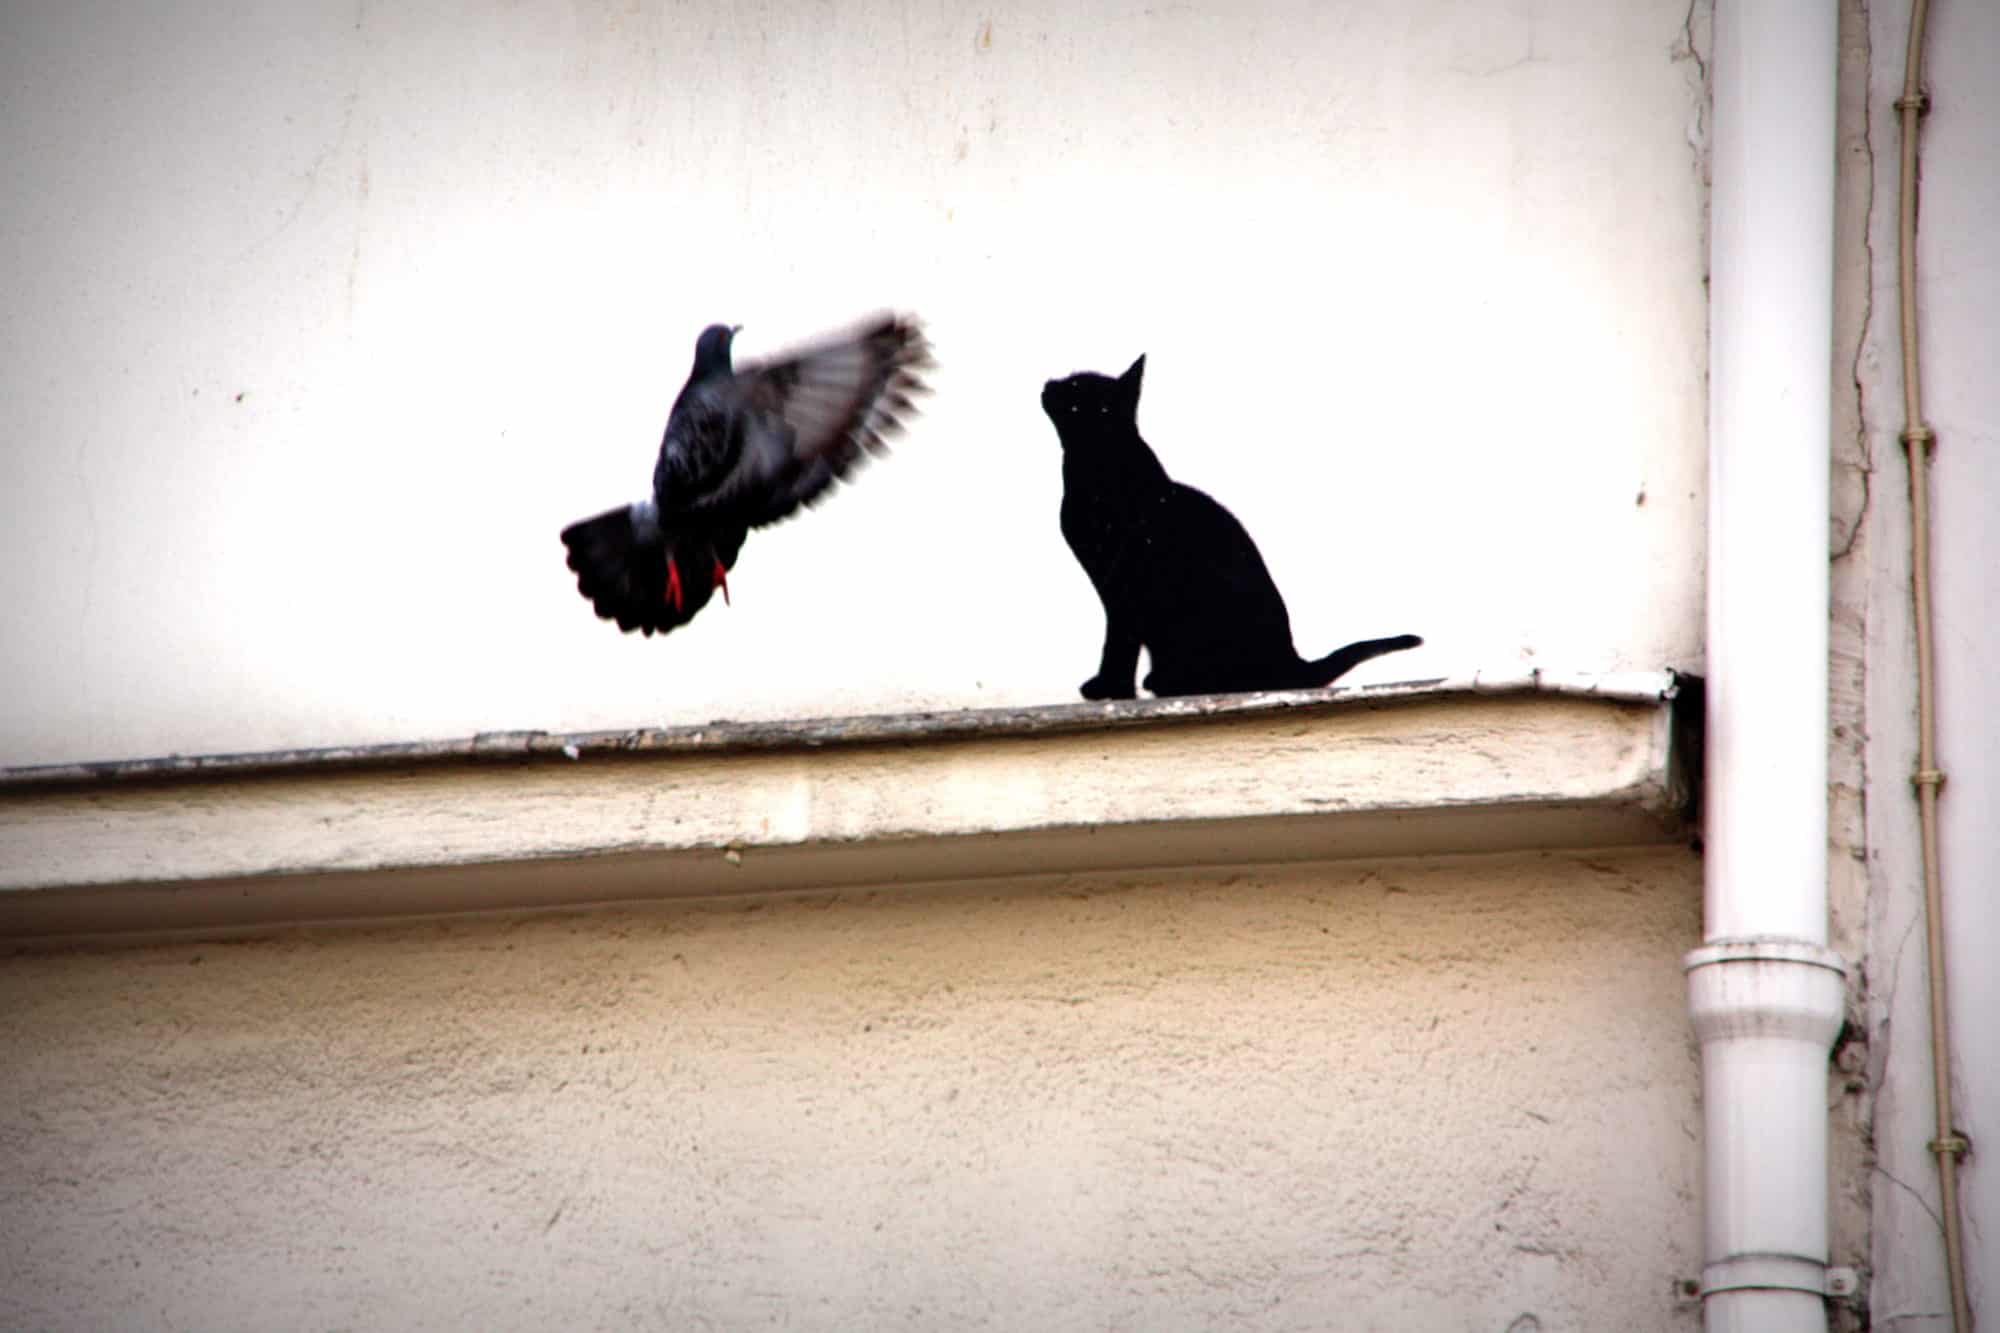 A black cat staring at a pigeon in panicked flight on a Paris rooftop.